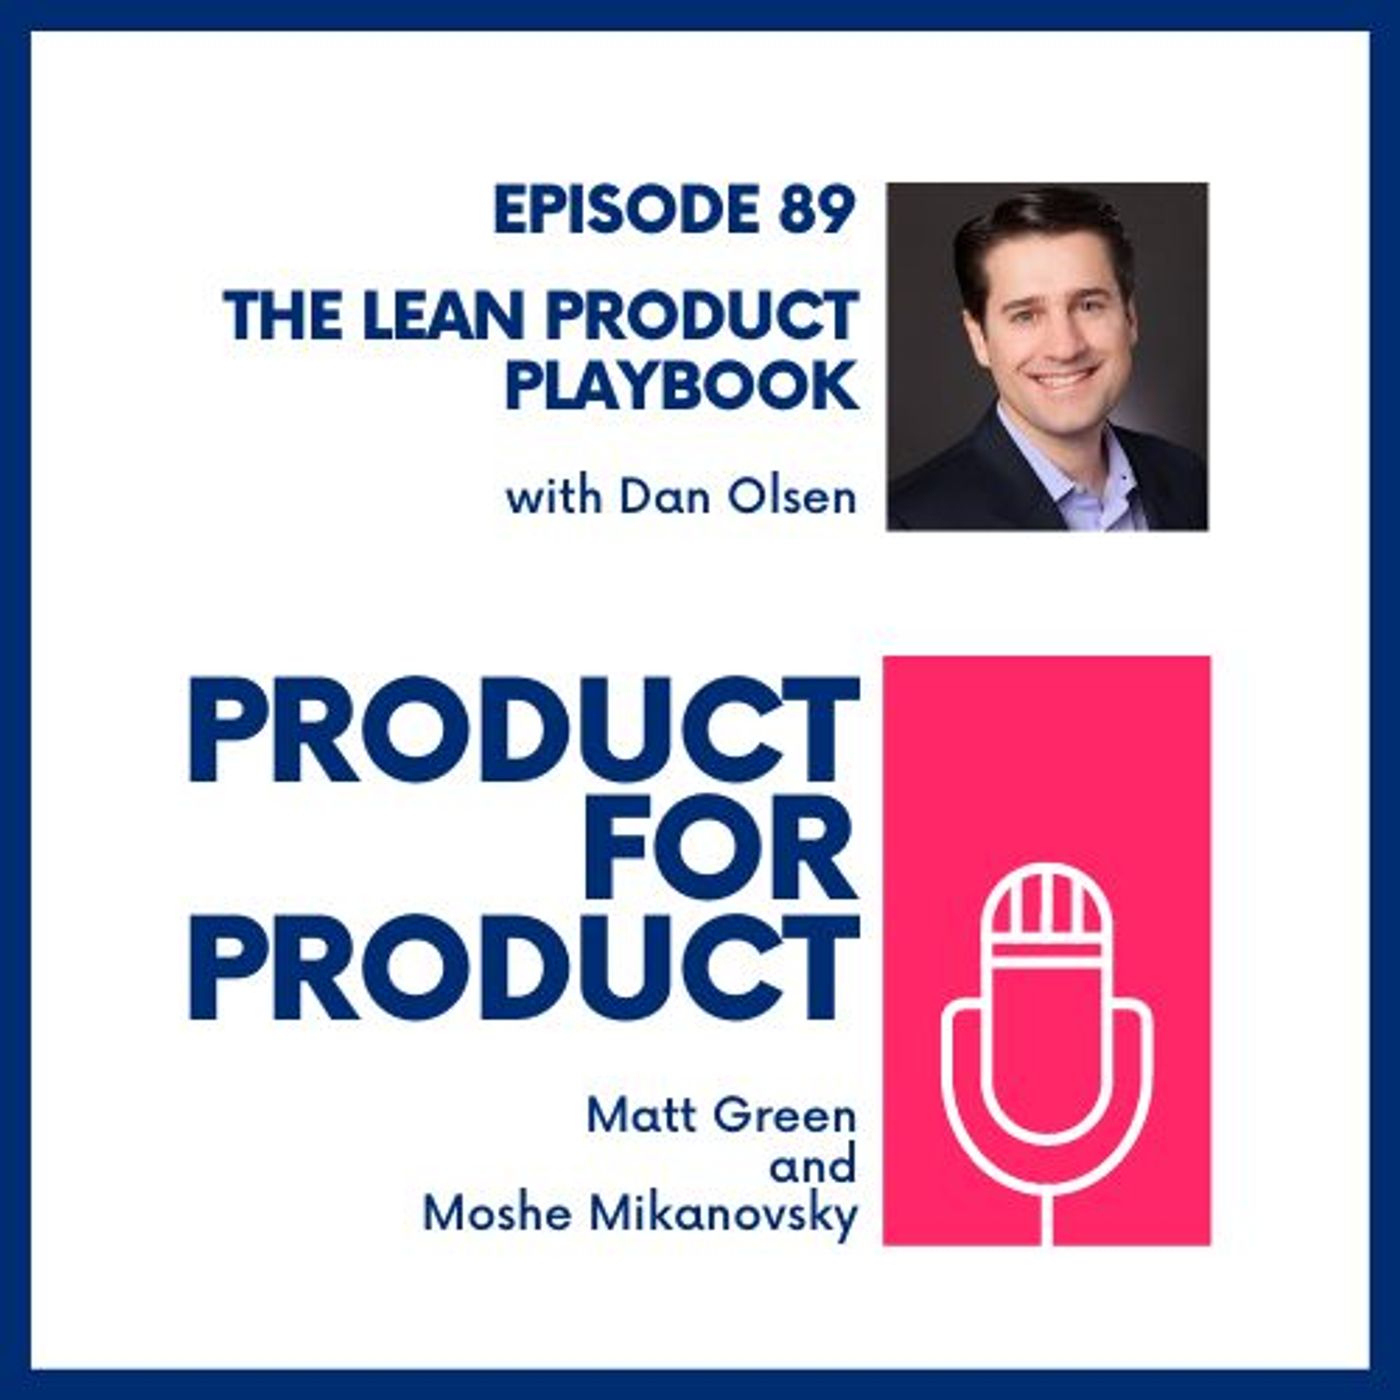 EP 89 - The Lean Product Playbook with Dan Olsen